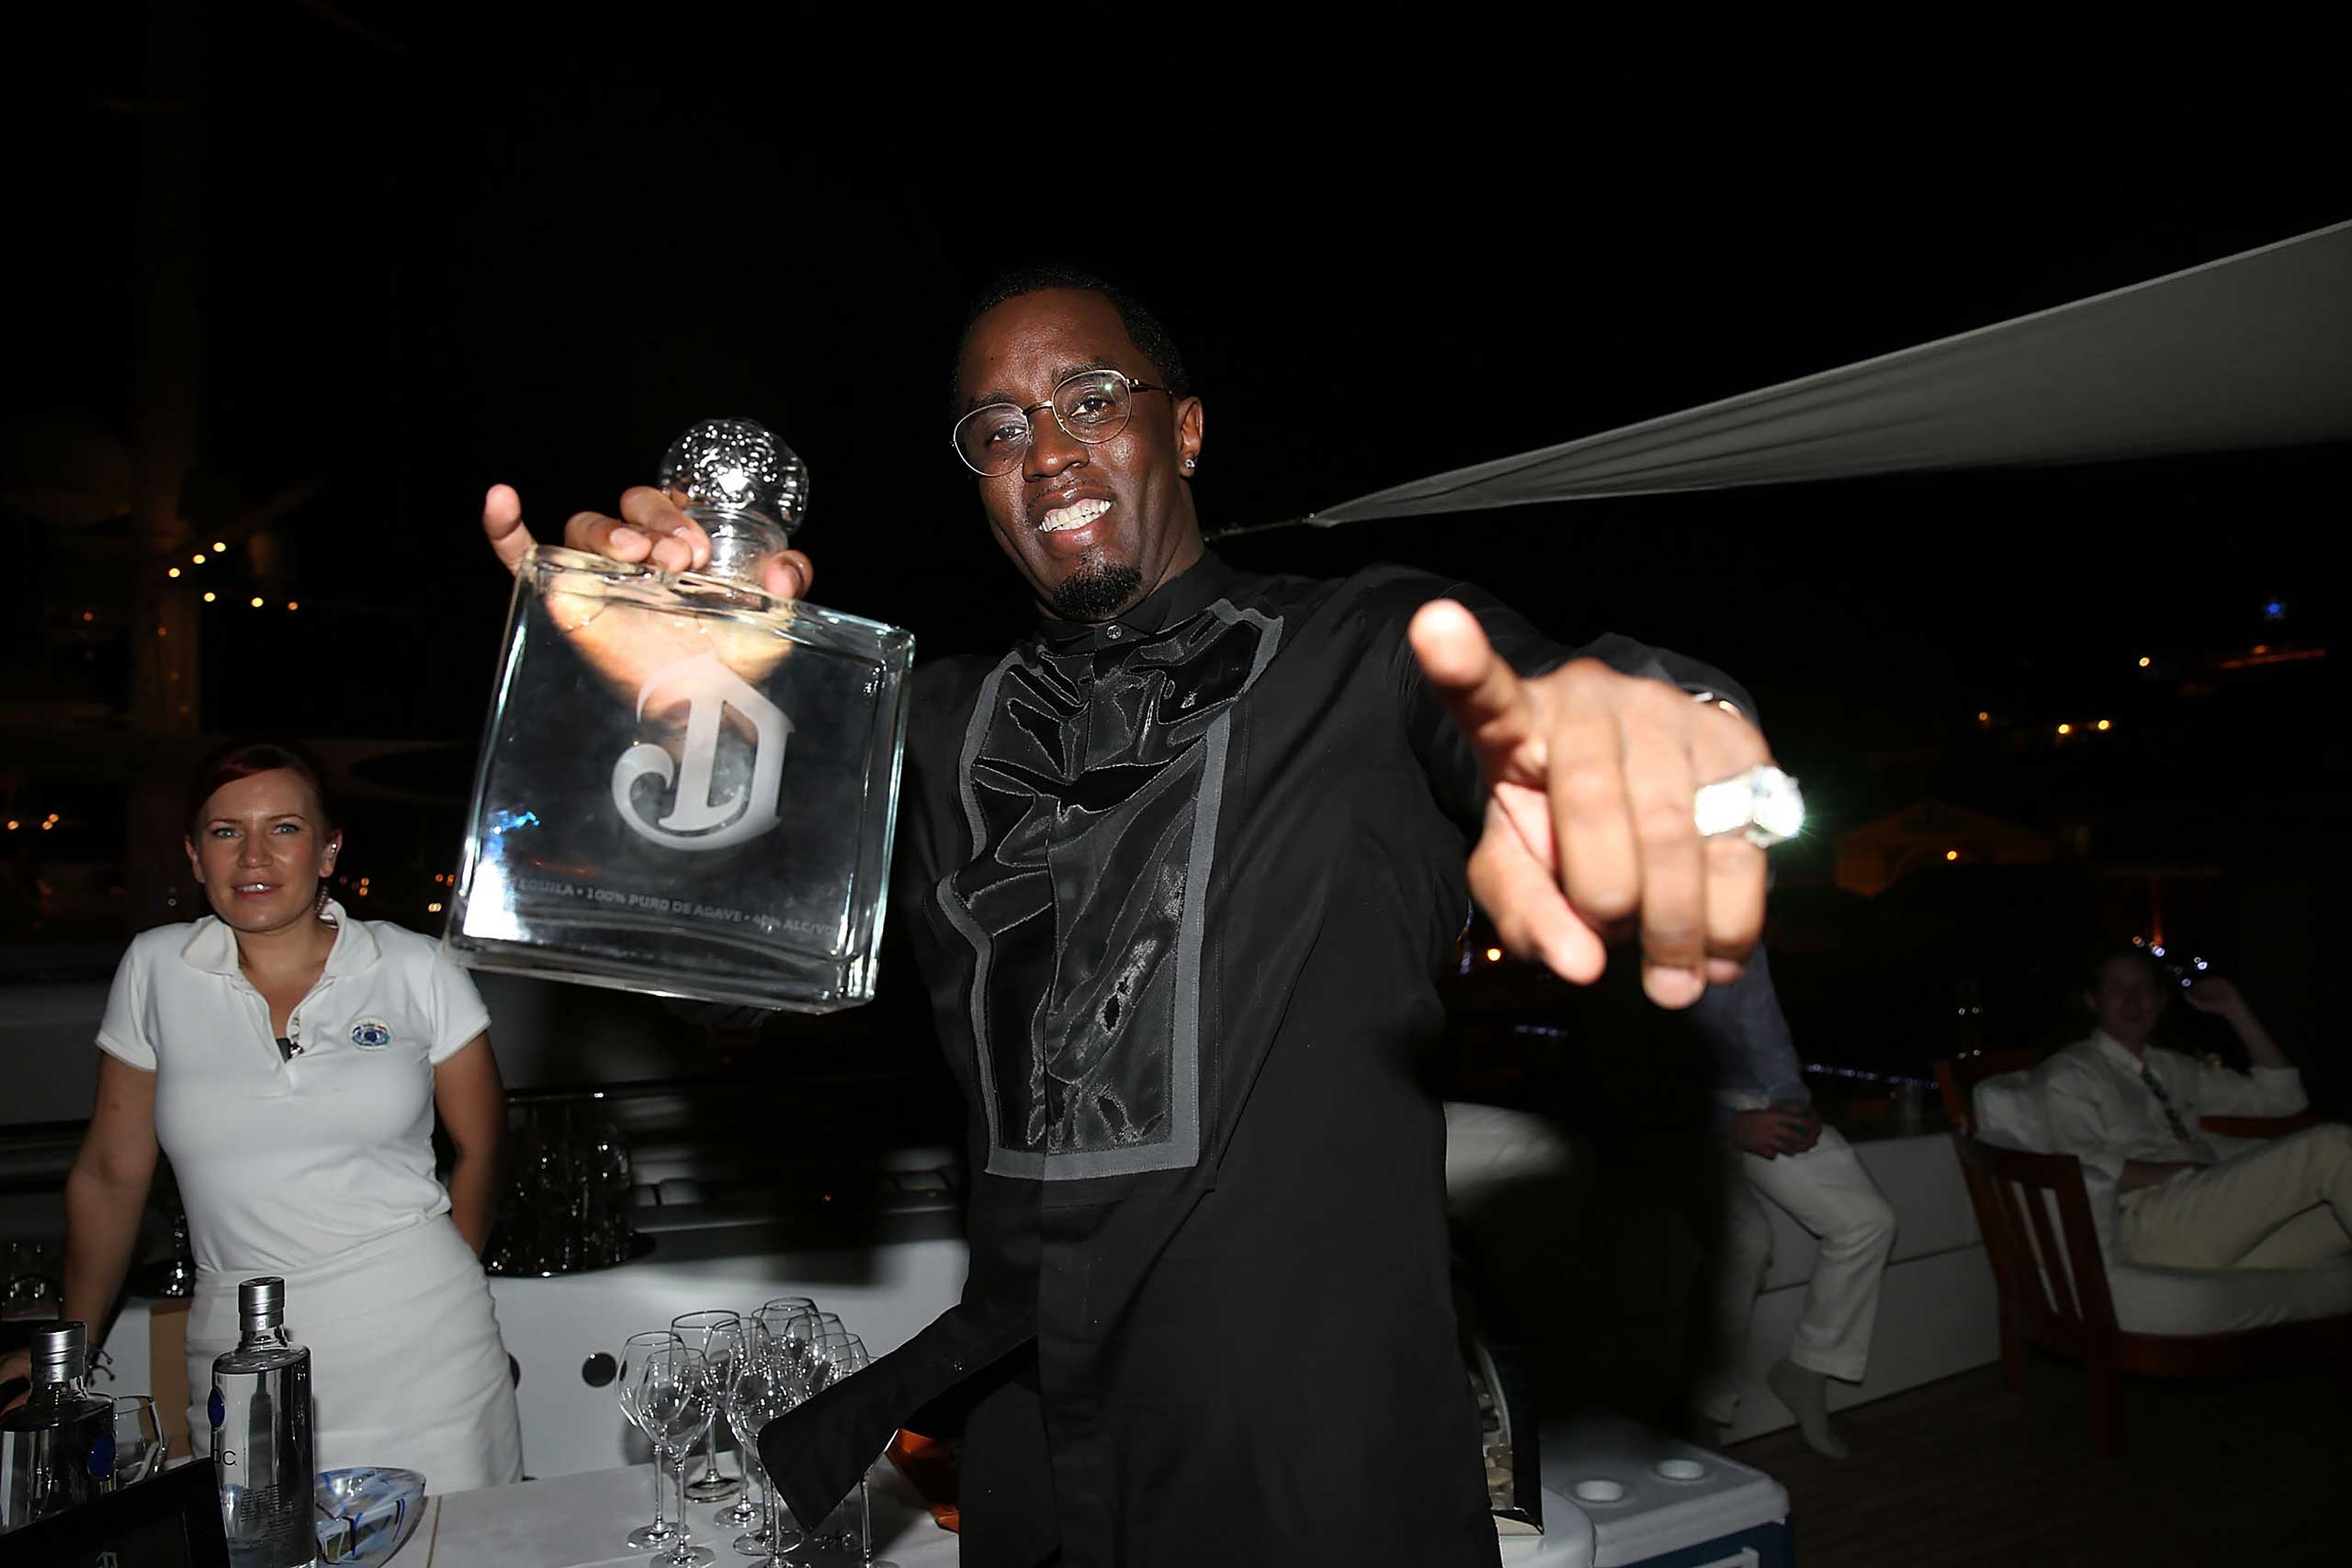 Sean Diddy Combs celebrate with their Circle of Friends at CIROC NYE in St Barthes hosted by Sean Diddy Combs on Dec. 31, 2014 in Gustavia, St Barthelemy. (Shareif Ziyadat&mdash;Getty Images)